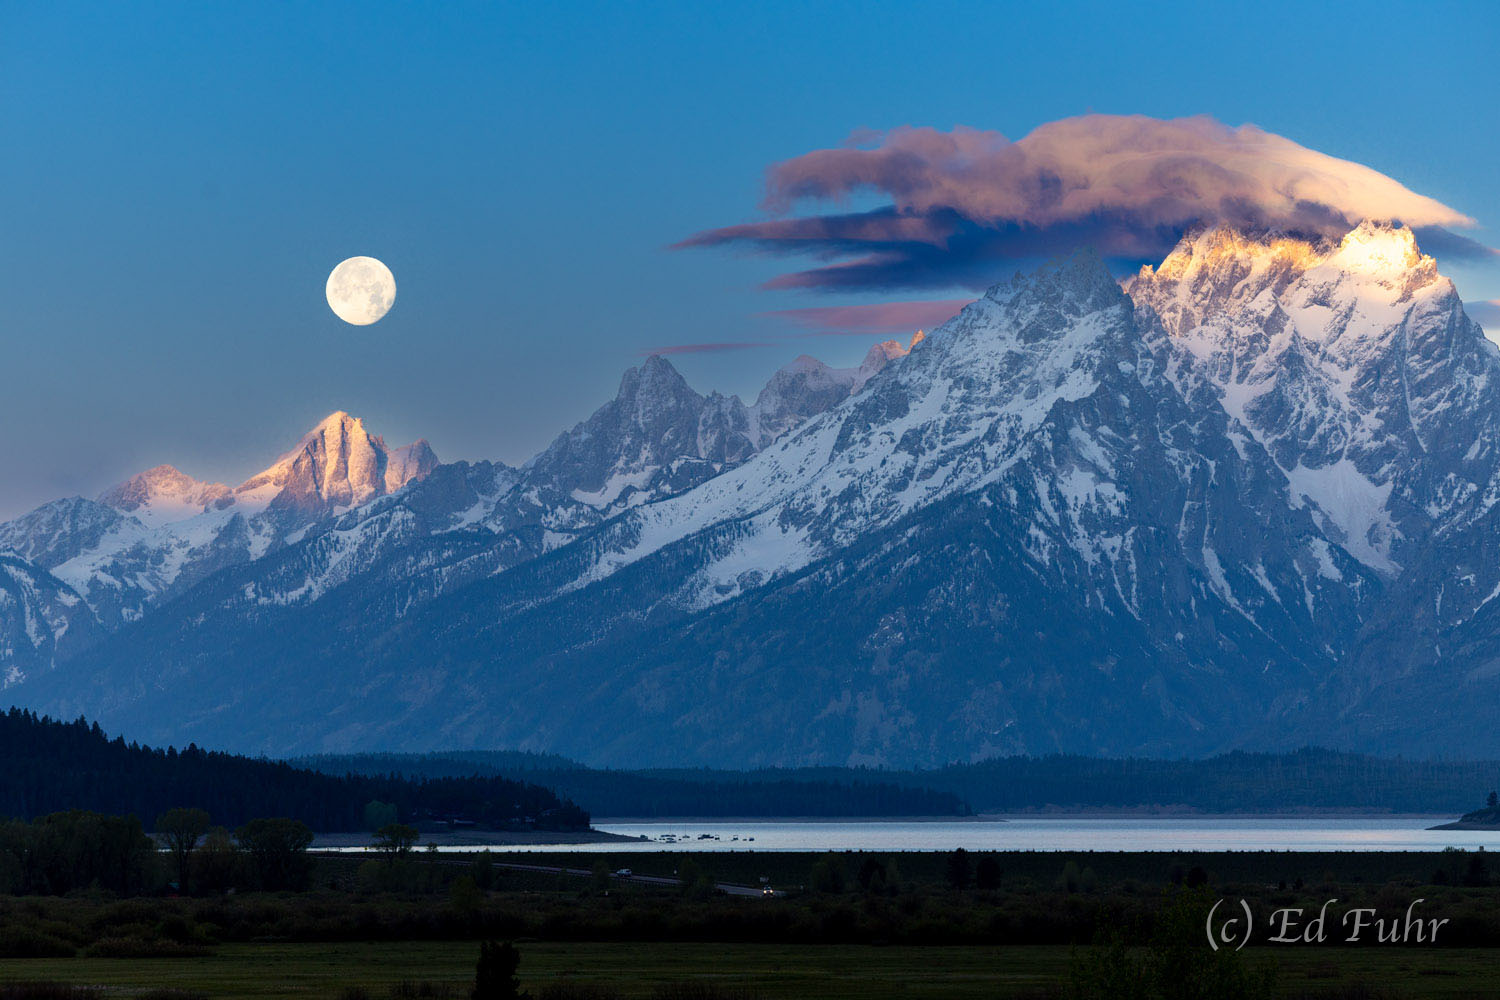 Sunrise has struck the high peaks of the Teton mountain range as a full moon begins to slip into a new day. Dwindling Lake Jackson...